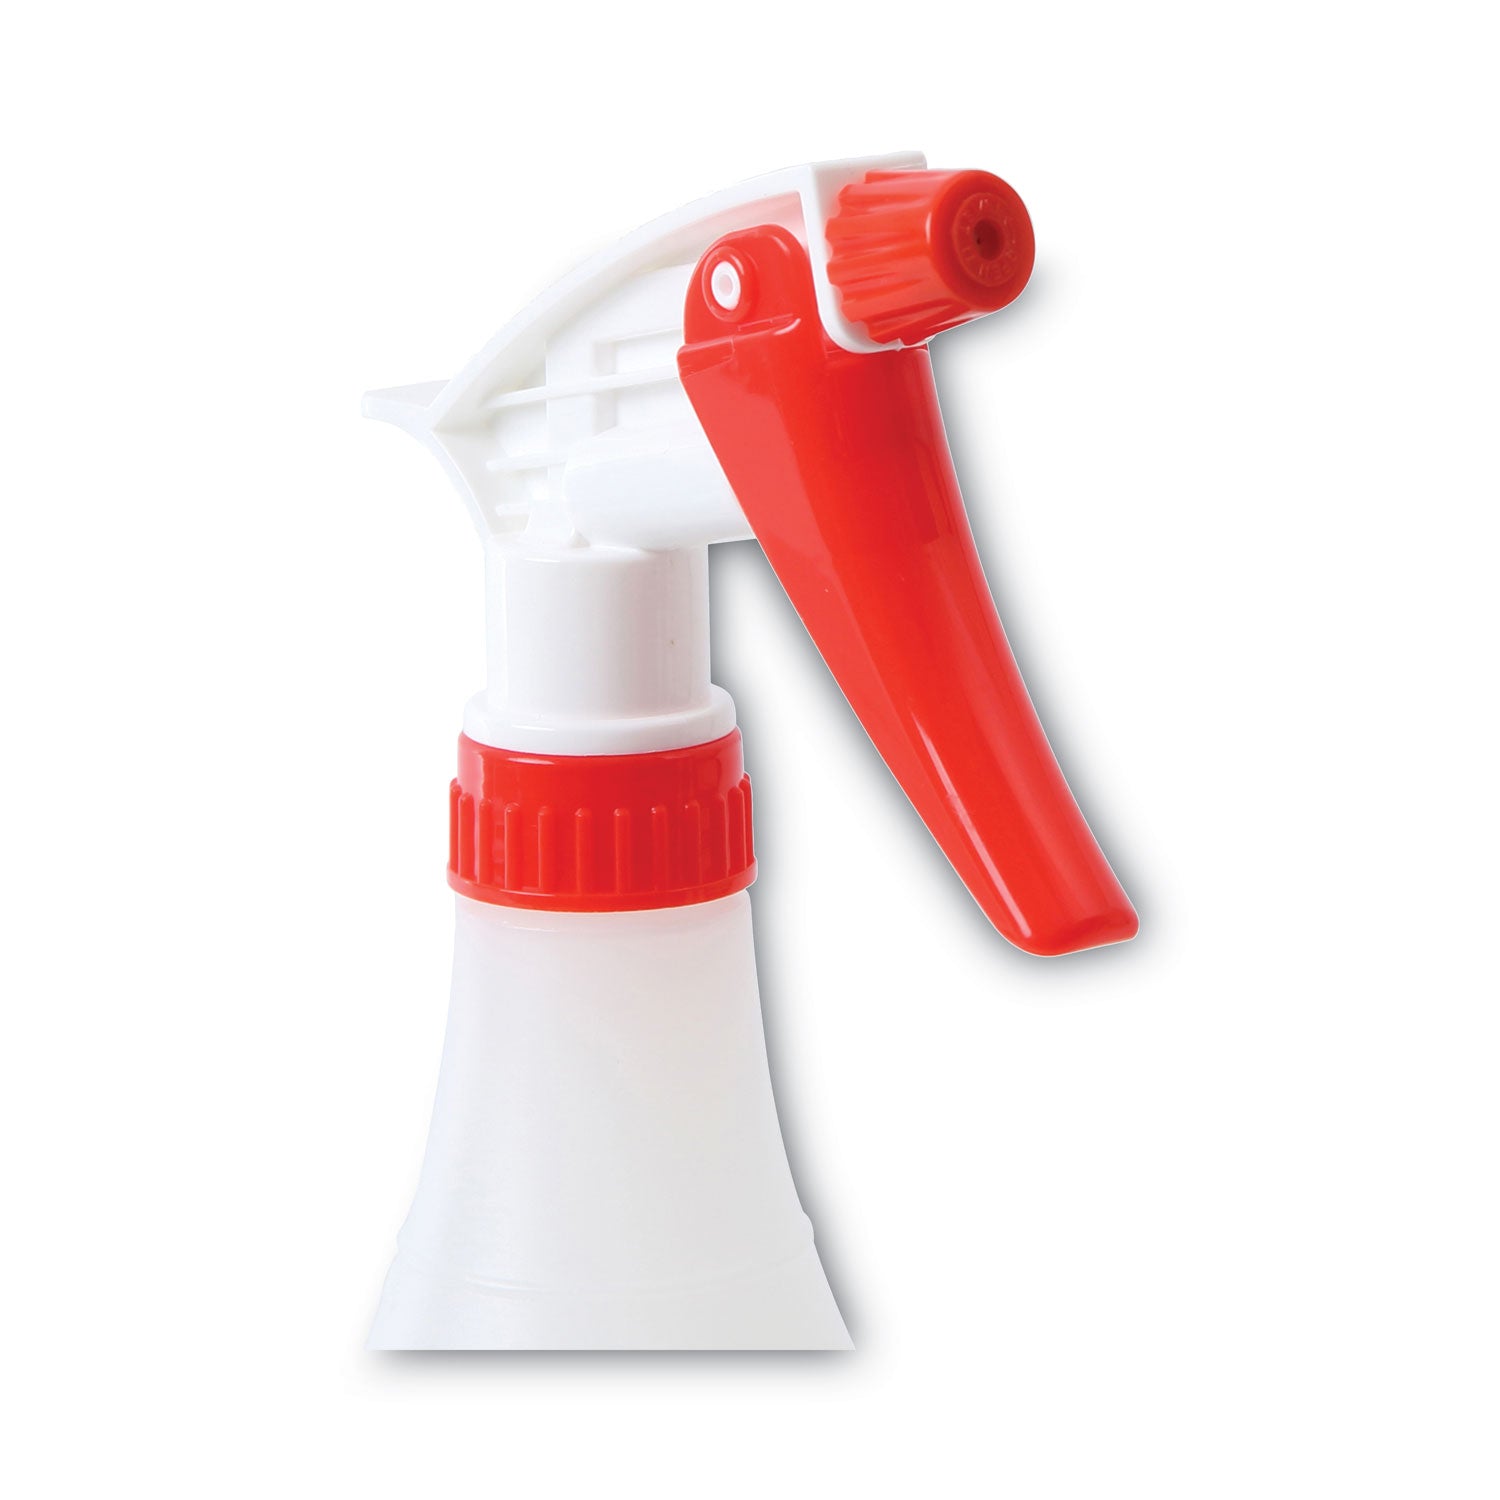 trigger-spray-bottle-32-oz-clear-red-hdpe-3-pack_bwk03010 - 6